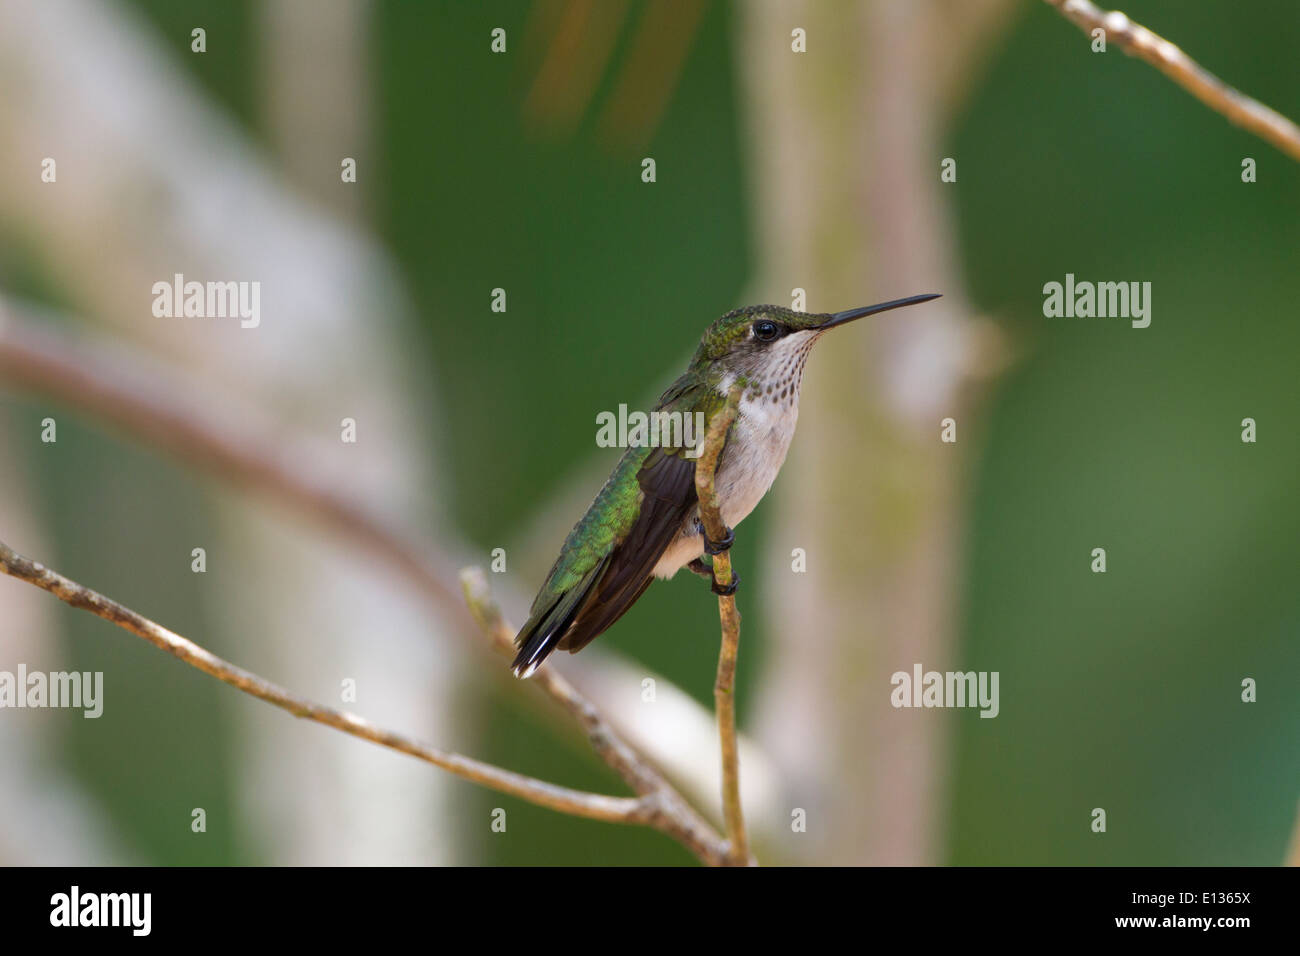 Immature Male Ruby-throated hummingbird perched on twig Stock Photo